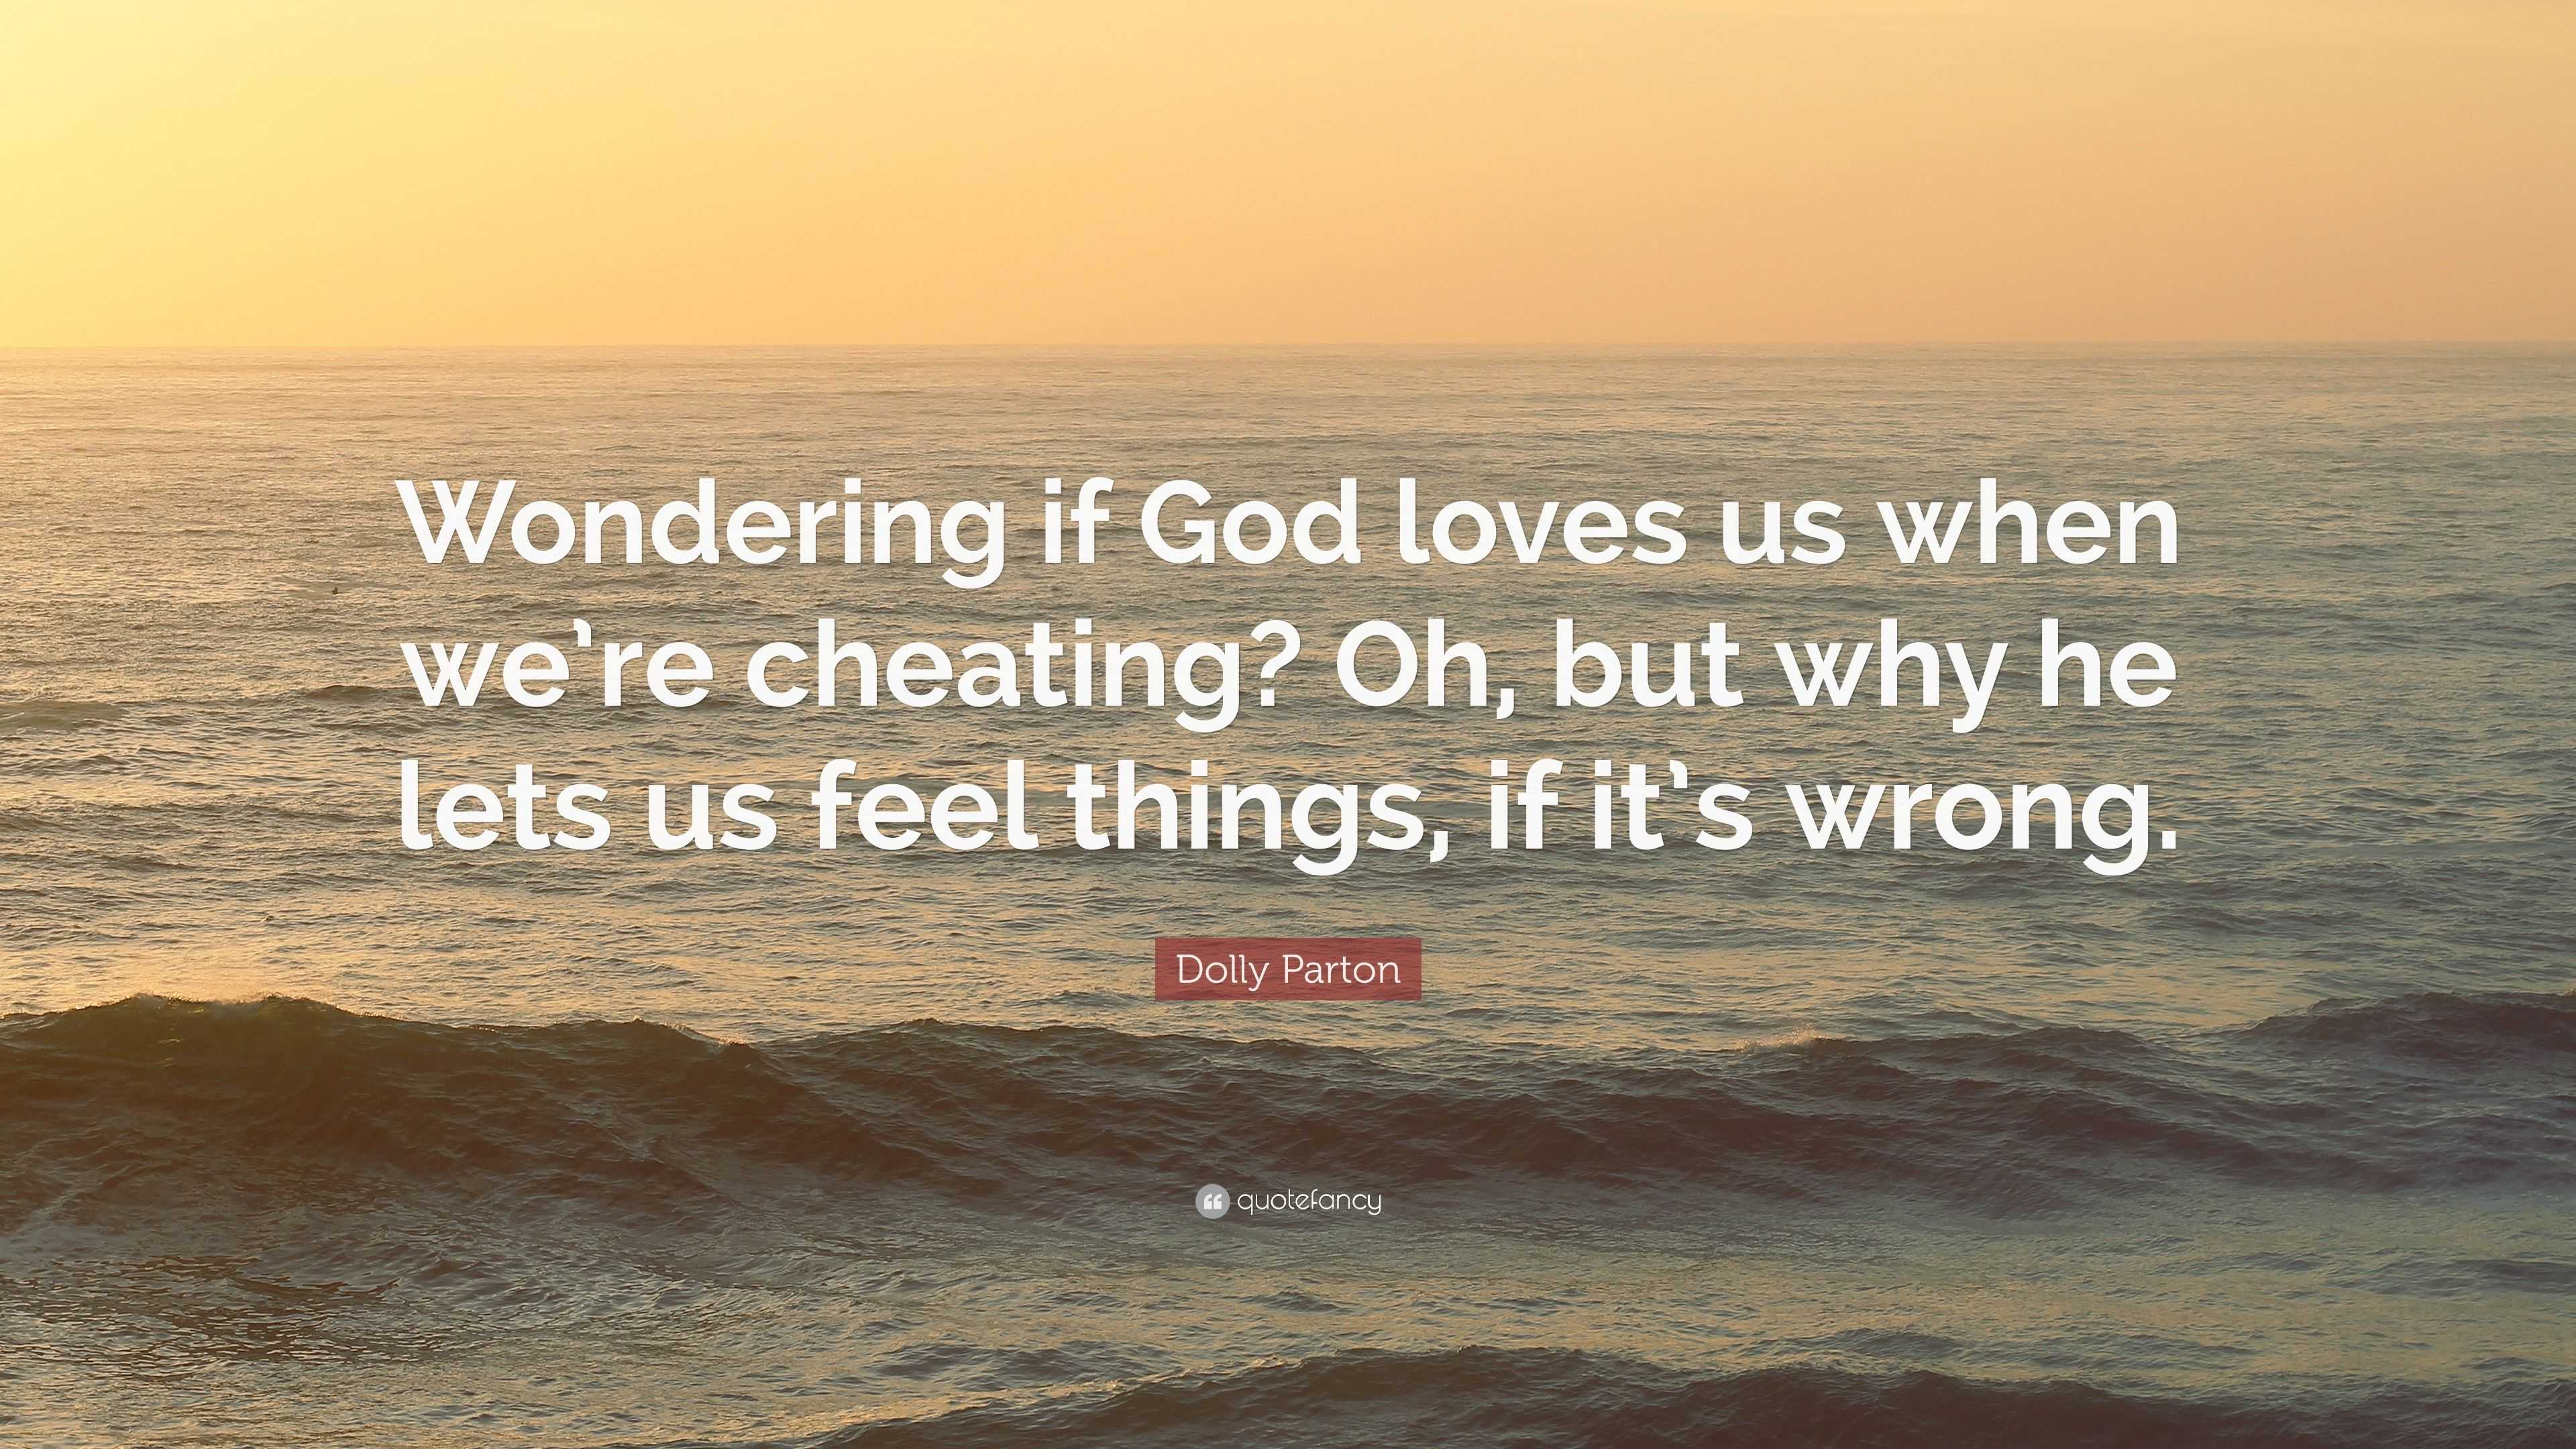 Dolly Parton Quote “Wondering if God loves us when we re cheating